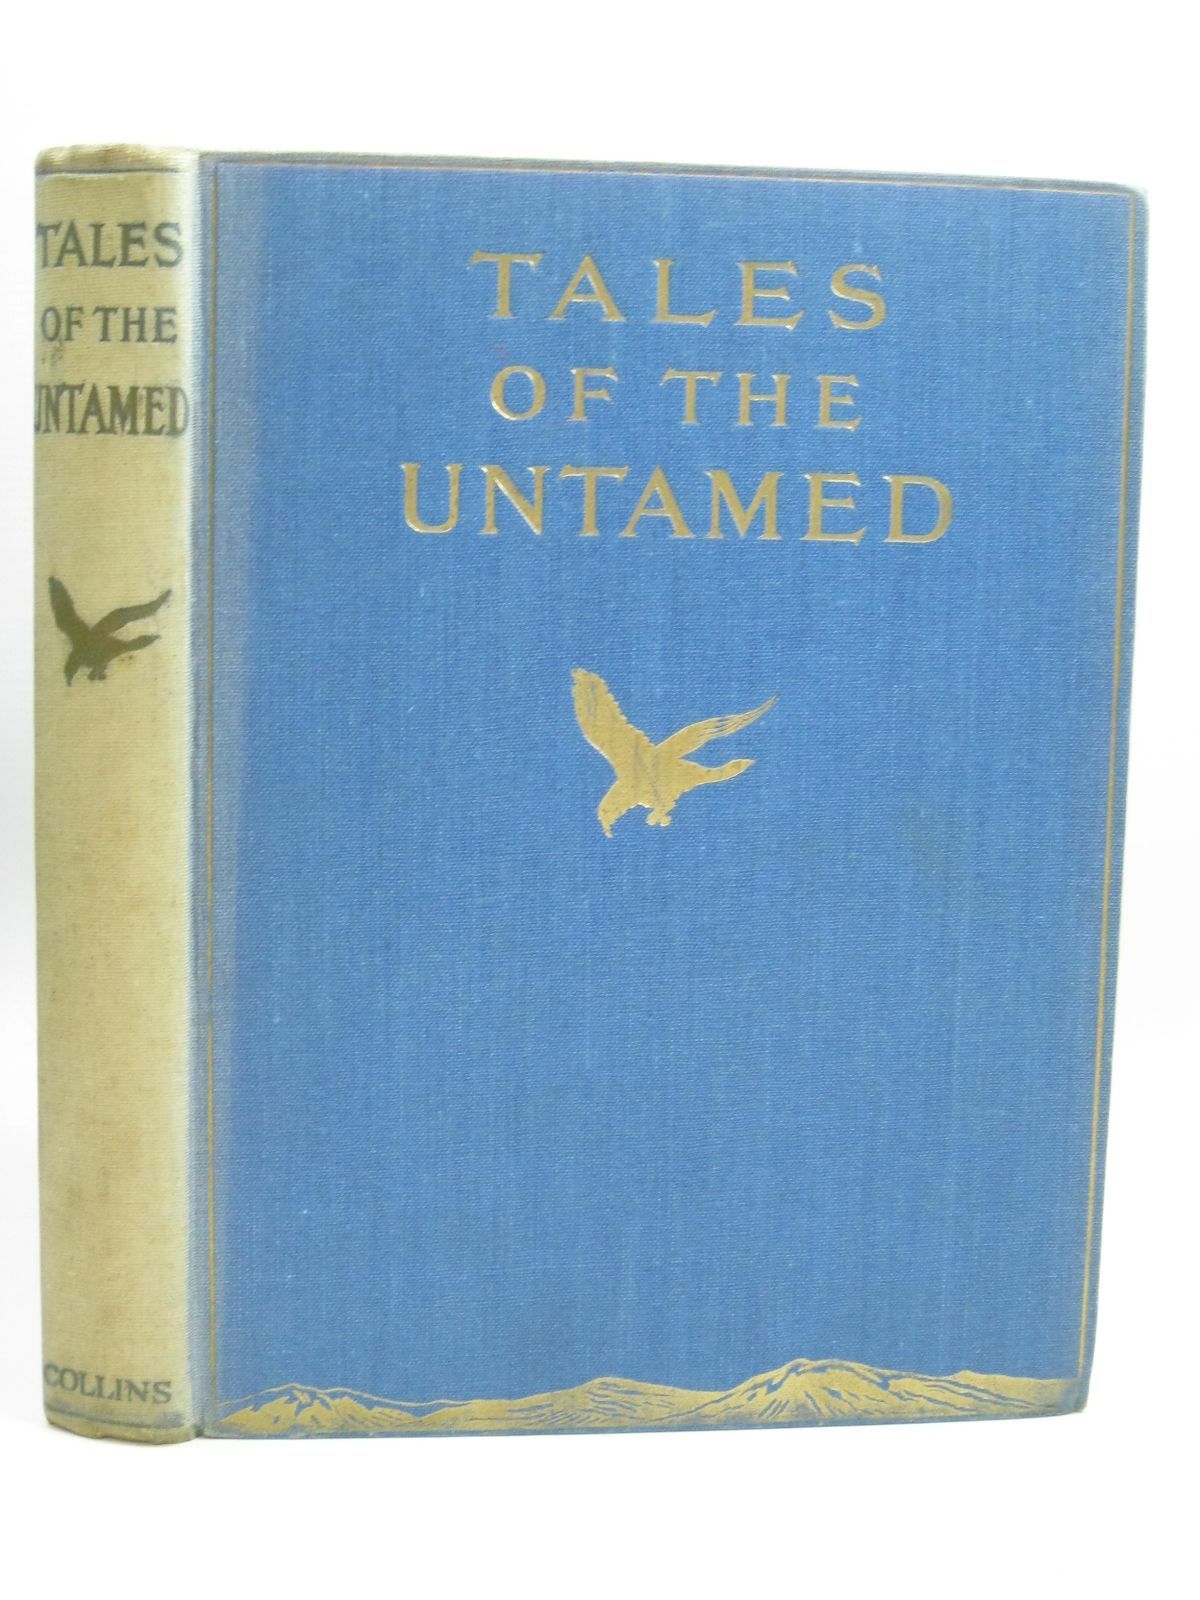 TALES OF THE UNTAMED